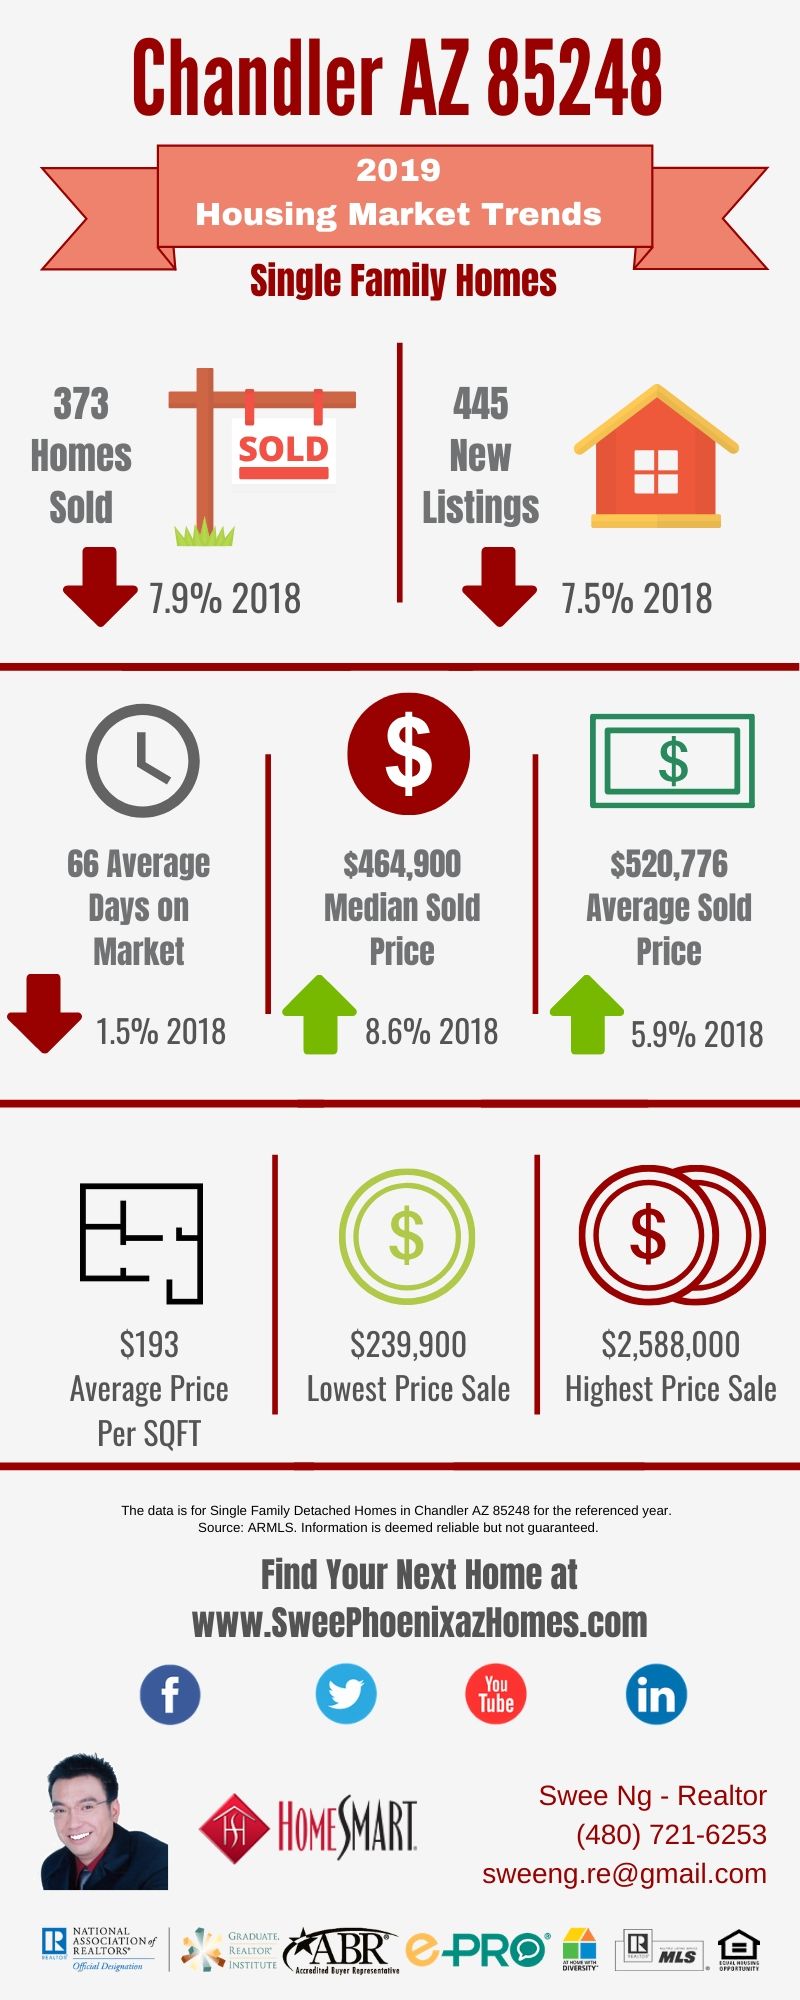 Chandler AZ 85248 Housing Market Trends Report 2019, House Value, Real Estate and Statistic by Swee Ng